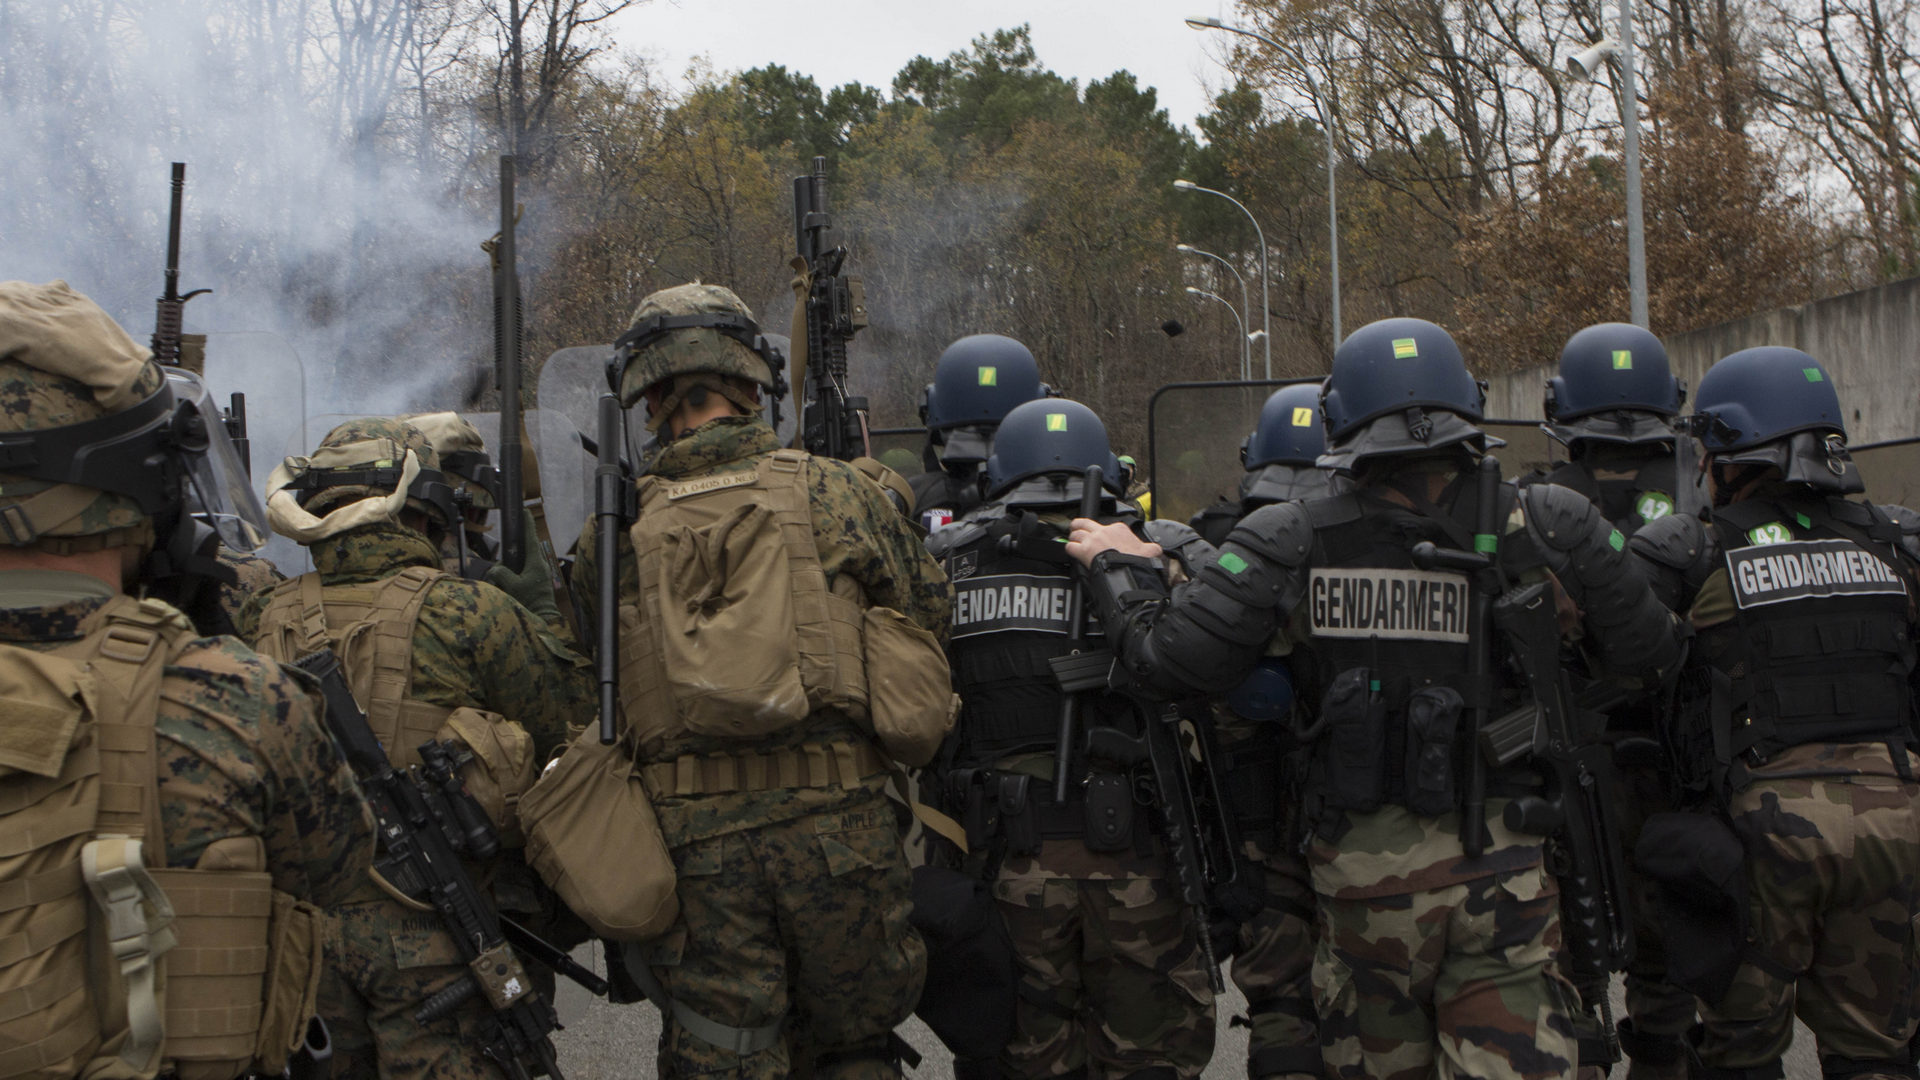 U.S. Marines with SPMAGTF Crisis Response – Africa and Police with Mobile Gendarmeries Armored Group and practice crowd and riot control techniques on National Center for Training of Police Forces of France, St. Astier, France – USMC Photo © Cpl. Jeraco Jenkins. -